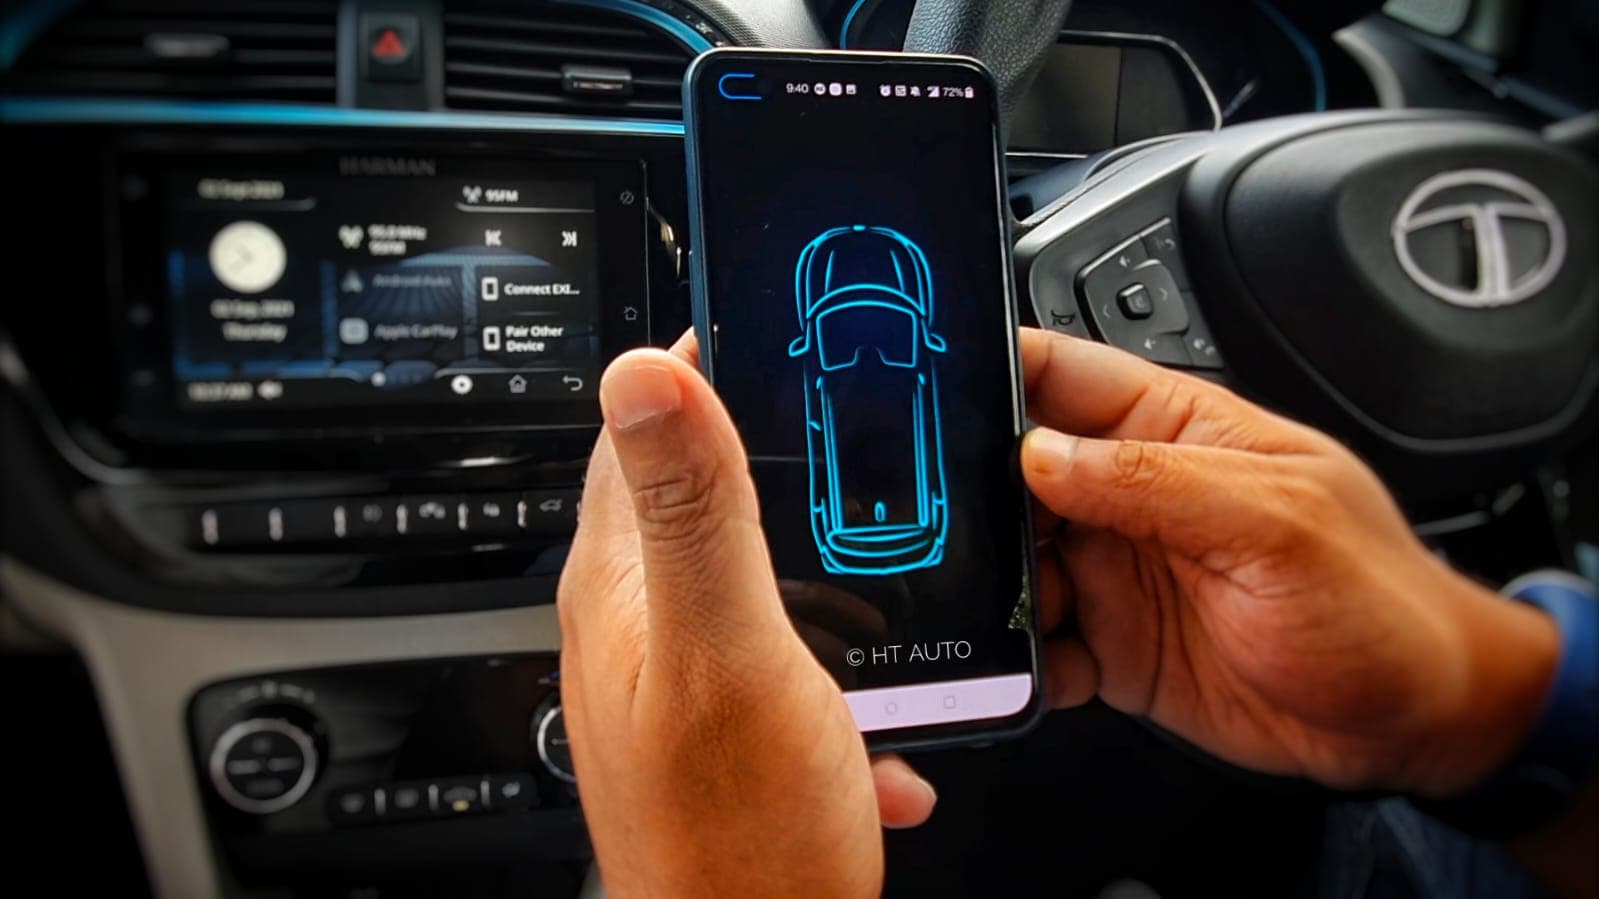 An owner can run a diagnostics of 2021 Tigor EV from an app and from anywhere.